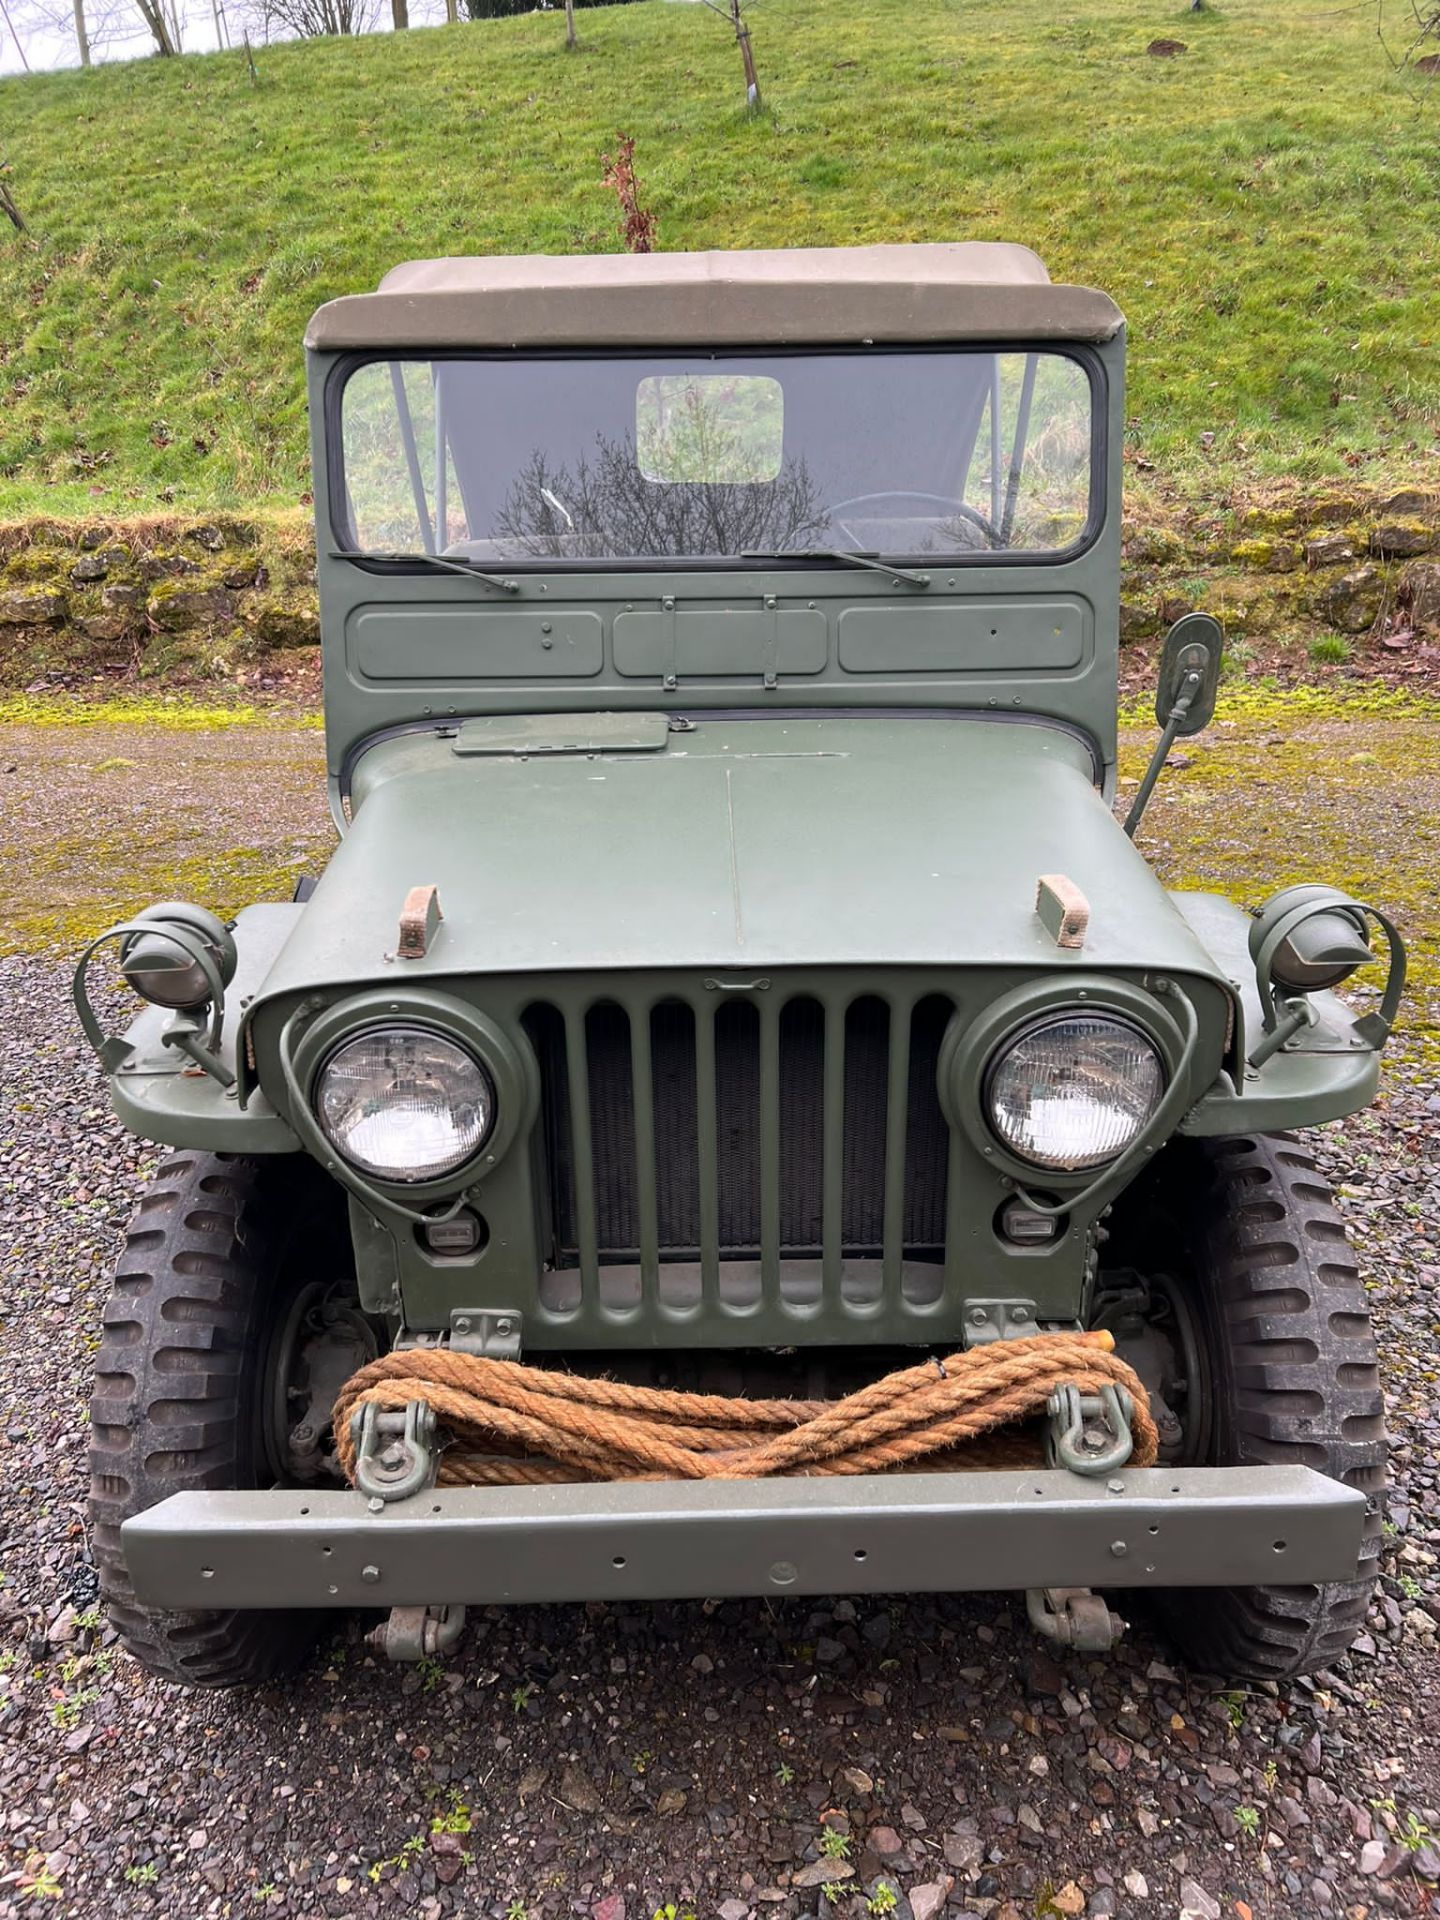 Willys Jeep Model M38 1945 - Image 3 of 13